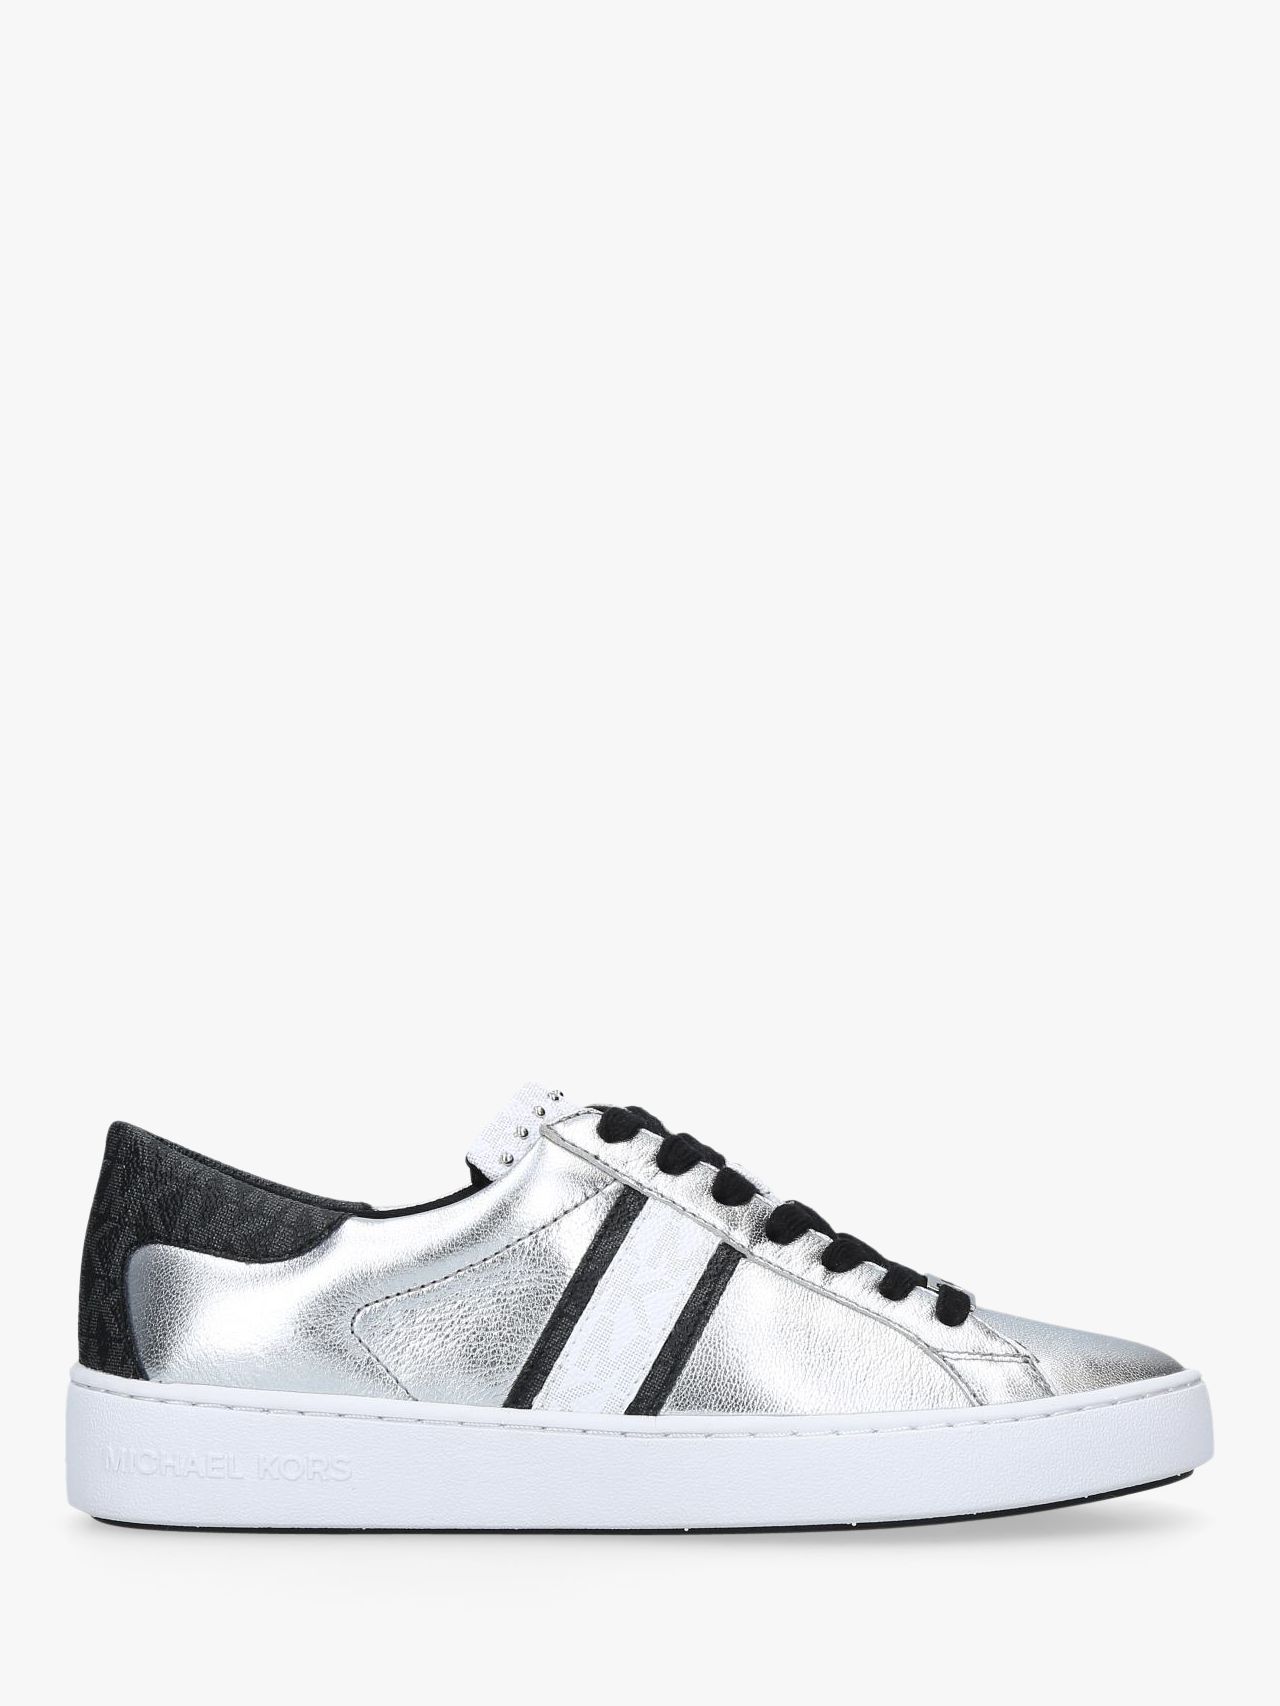 michael kors black and silver sneakers